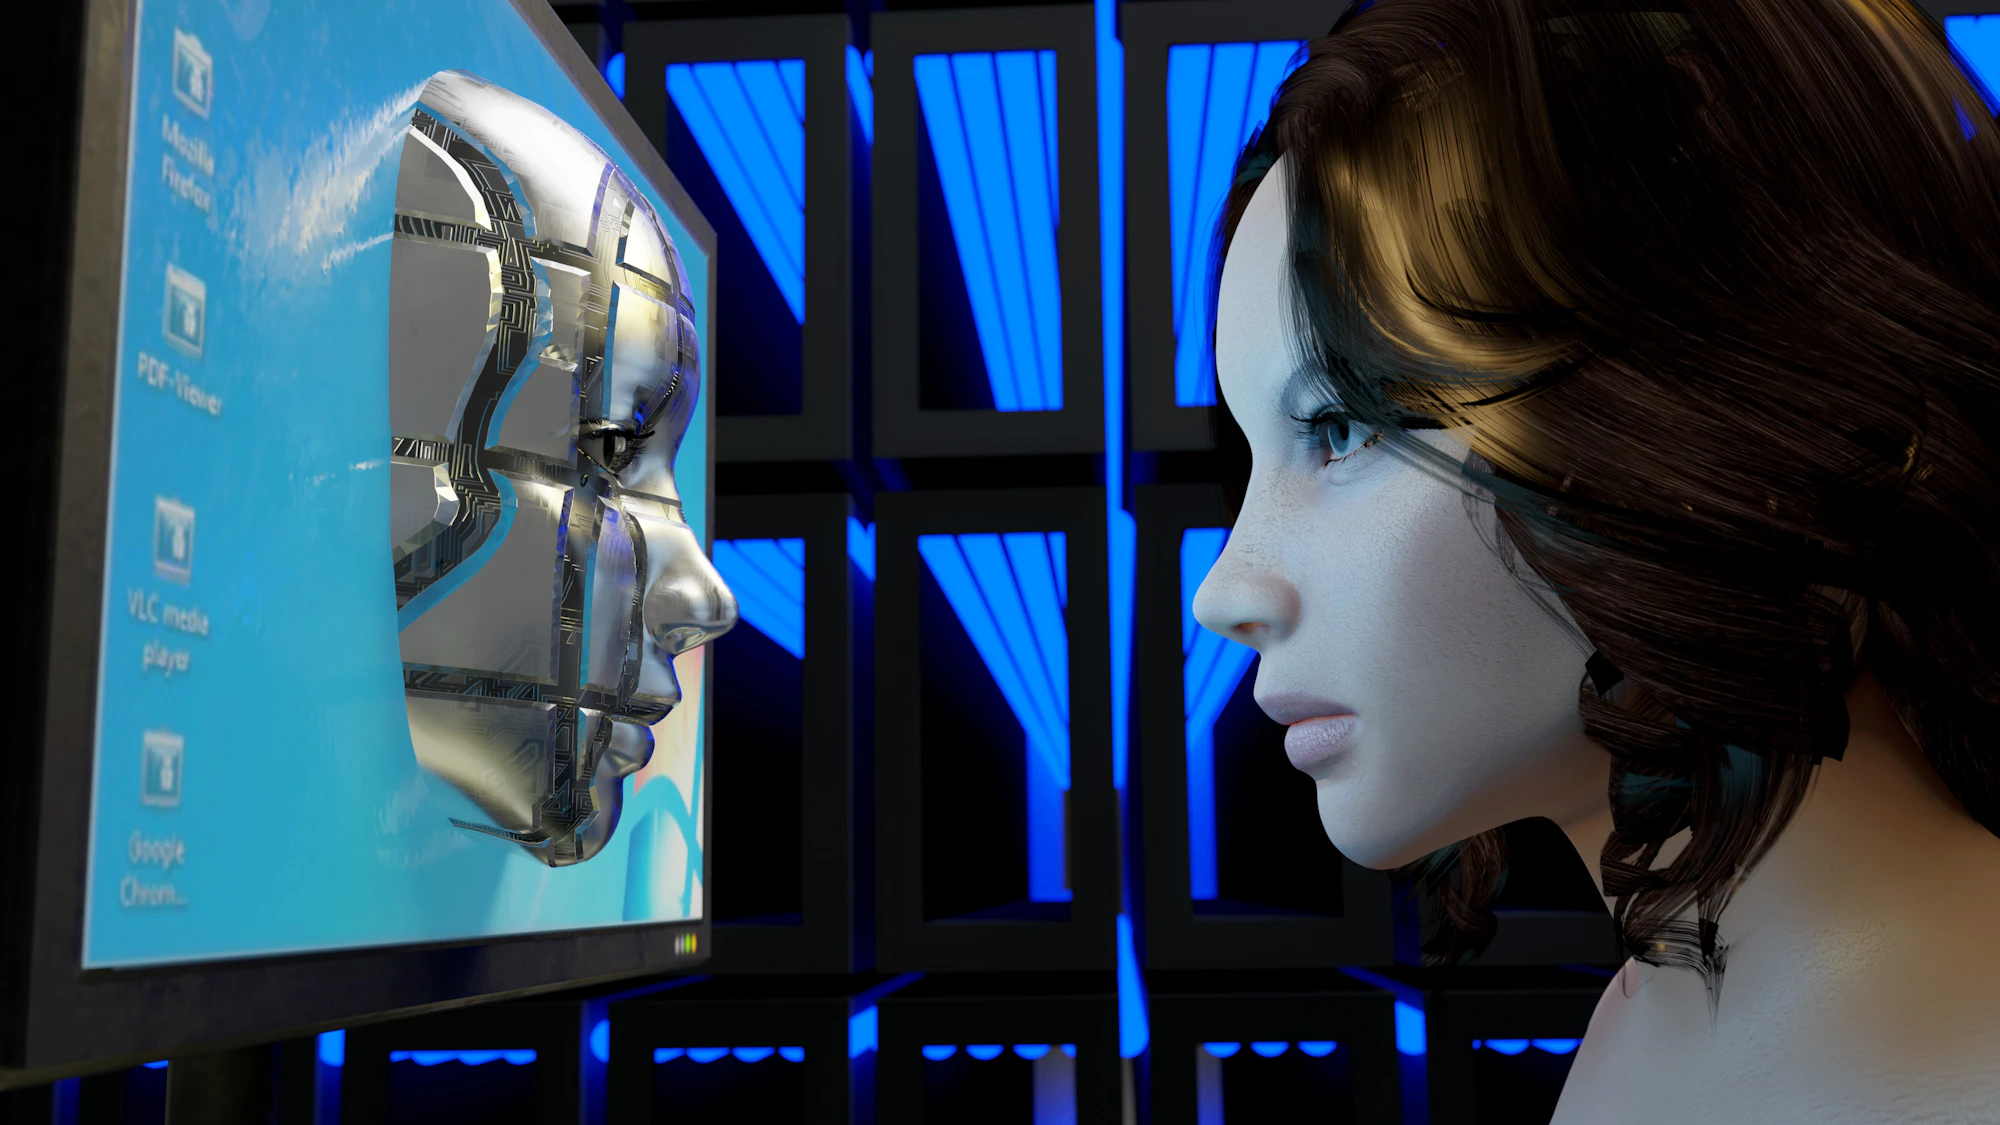 AI partners are gaining popularity for companionship and romance.